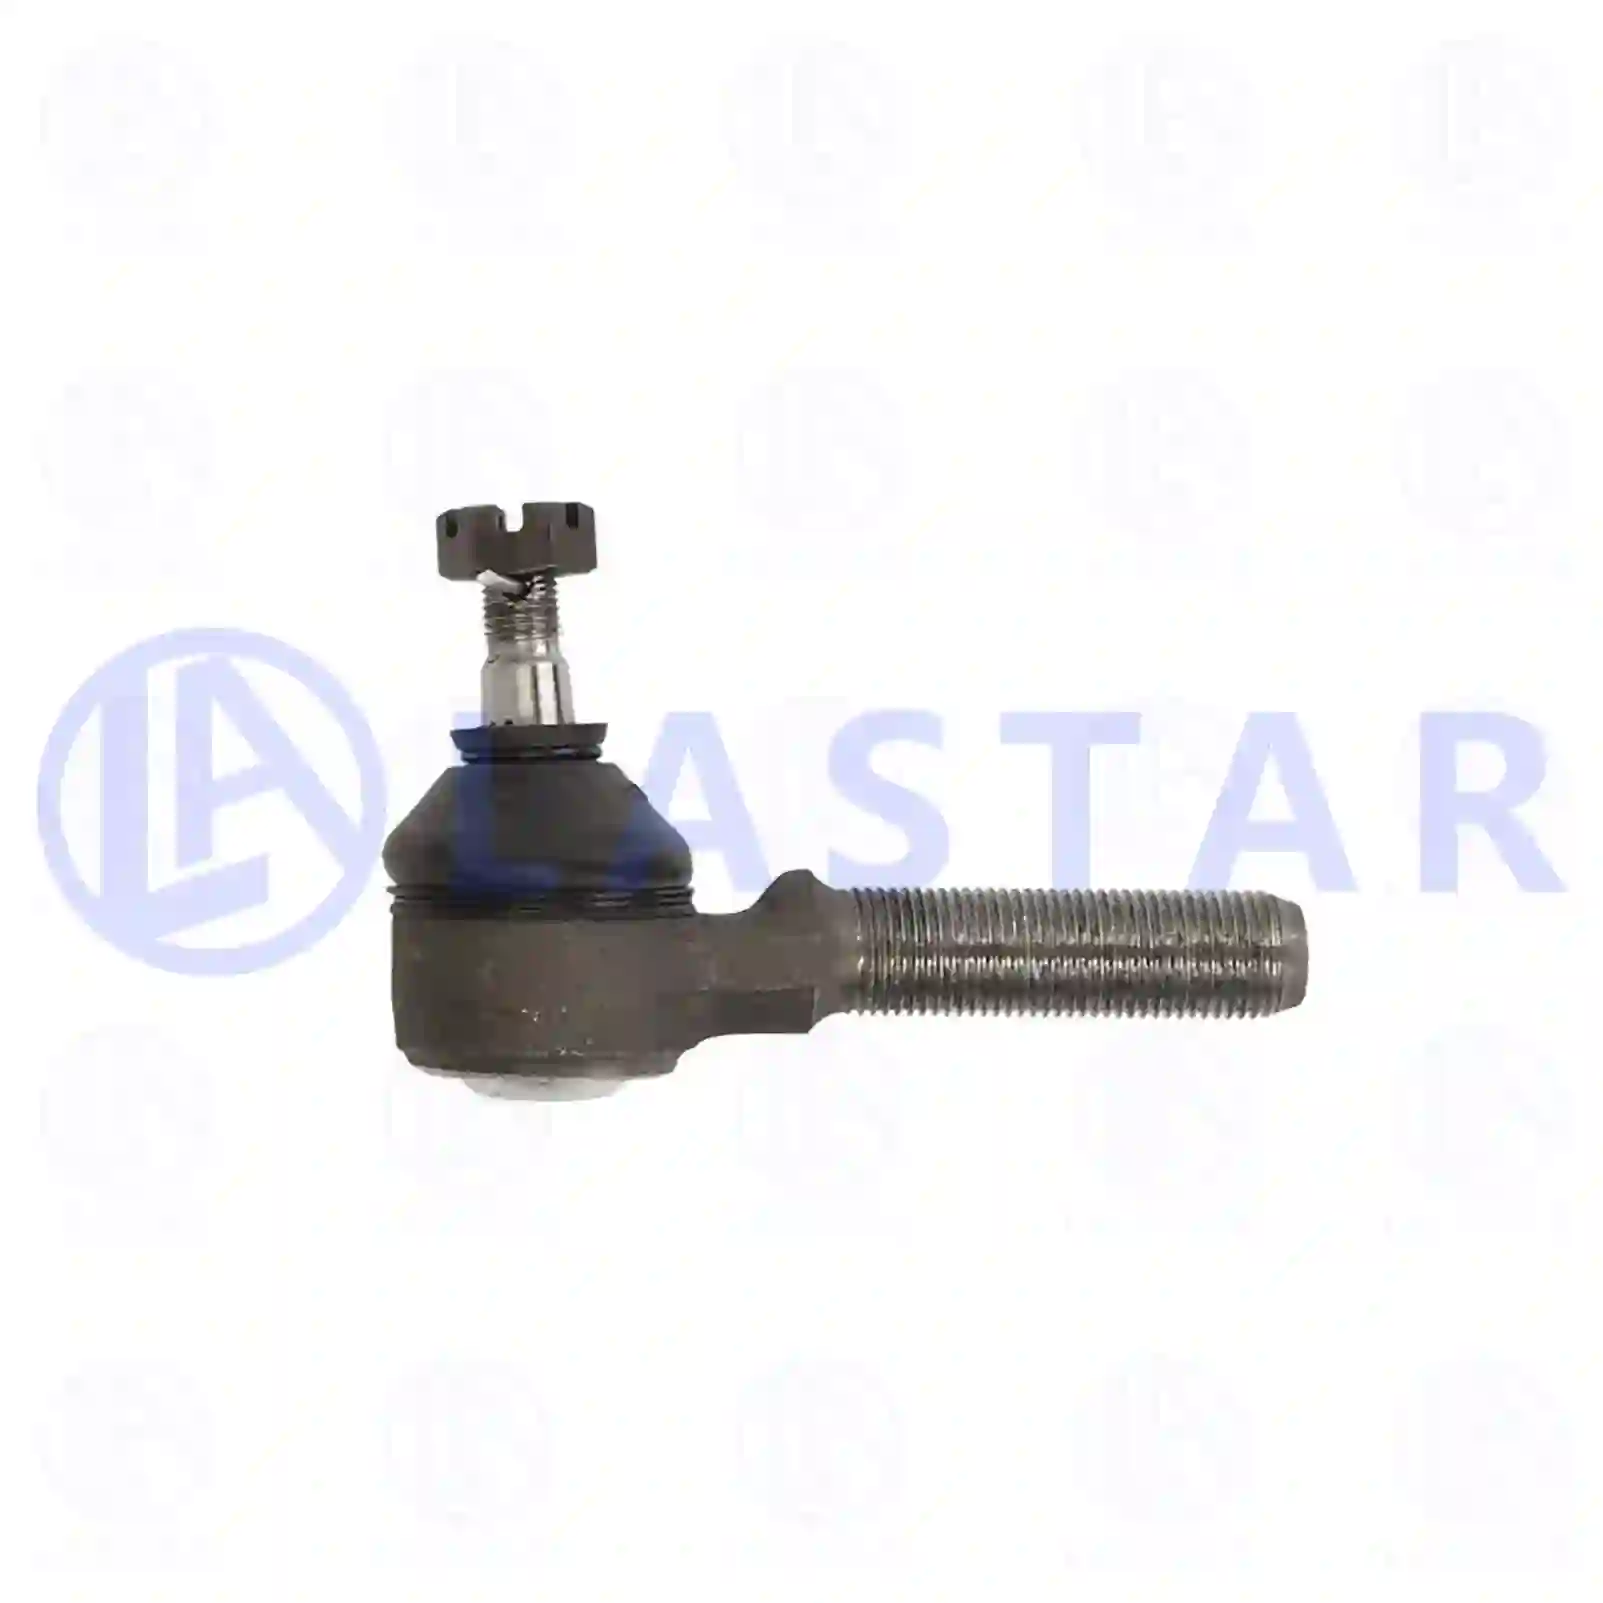 Gear Shift Lever Ball joint, right hand thread, la no: 77733486 ,  oem no:42042912, 03435788, 41218482, 42042912 Lastar Spare Part | Truck Spare Parts, Auotomotive Spare Parts